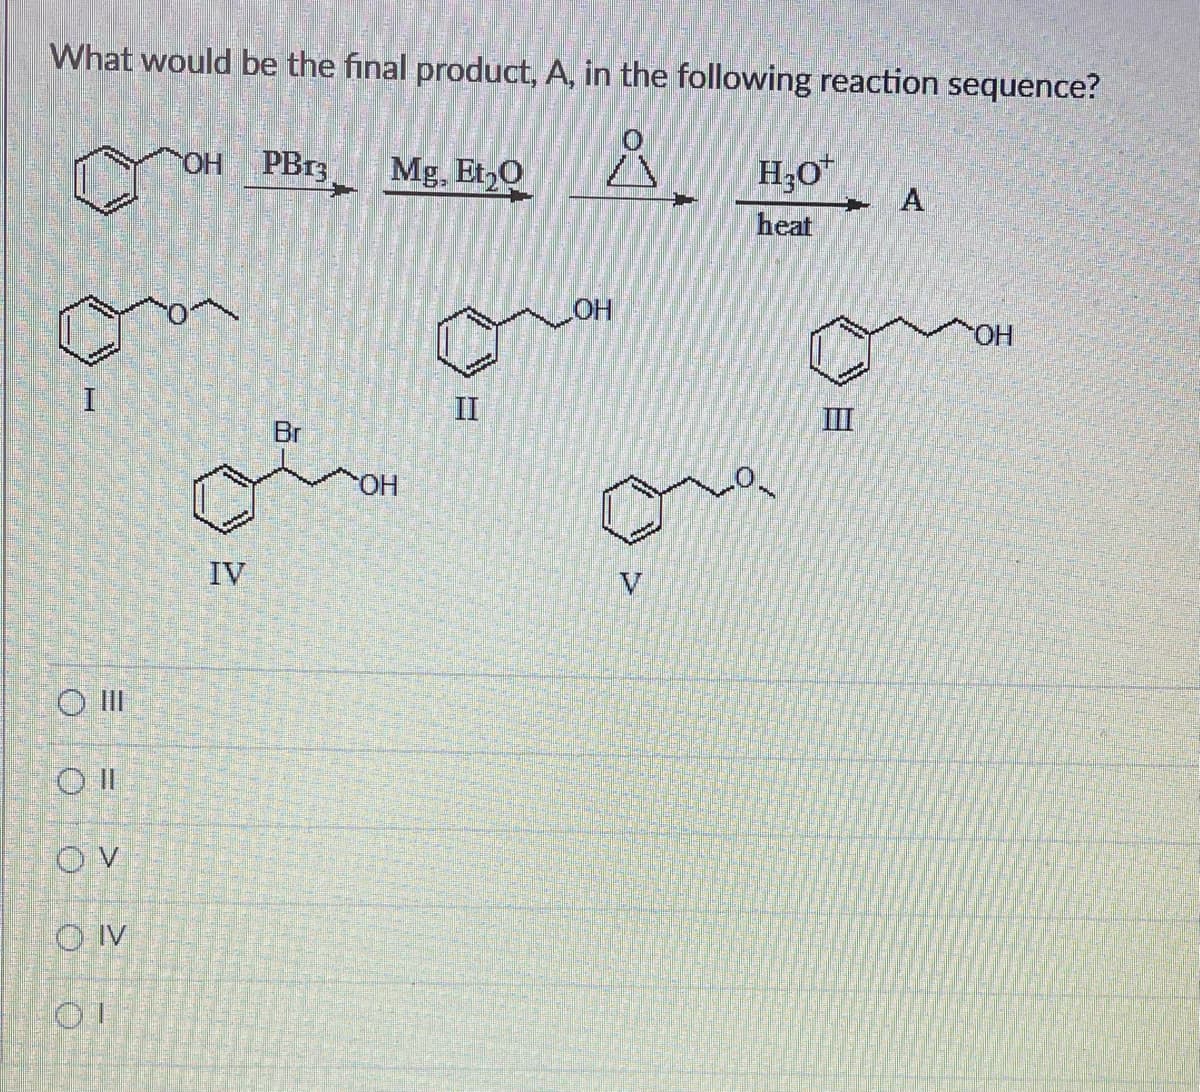 What would be the final product, A, in the following reaction sequence?
Å
H
O III
O II
OV
ㅎㅎ
OH PB13
IV
Br
Mg. Et₂0
OH
II
LOH
V
+
H₂O*
heat
+ A
8
OH